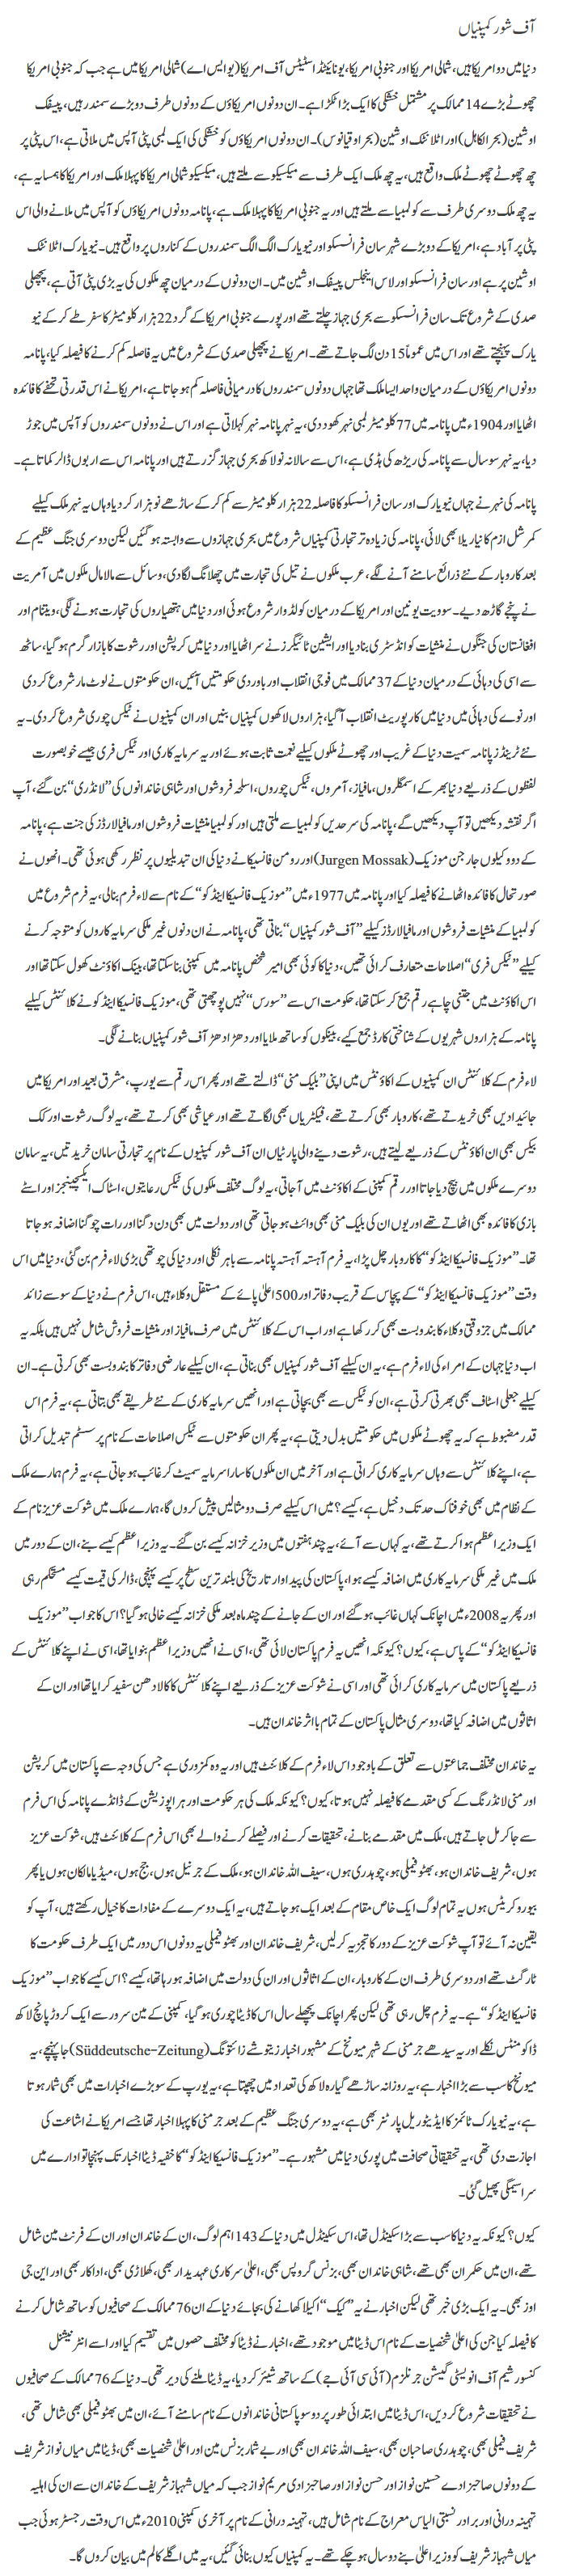 Off Shor Companian by Javed Chaudhry